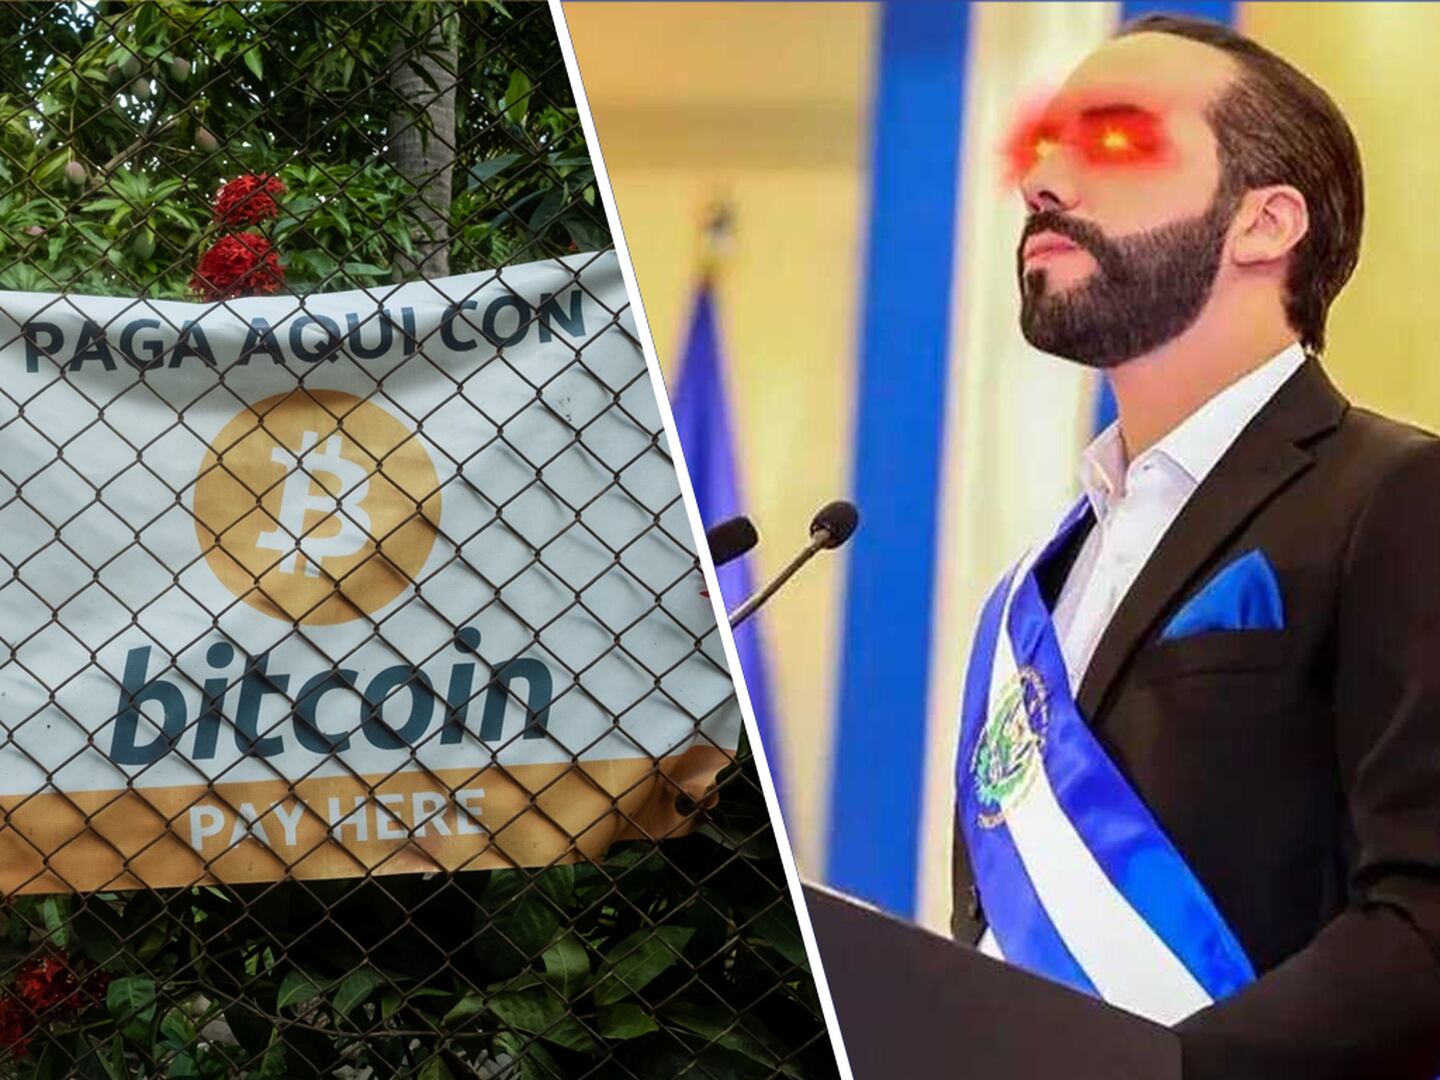 El Salvador's president is doubling down on his Bitcoin bet.